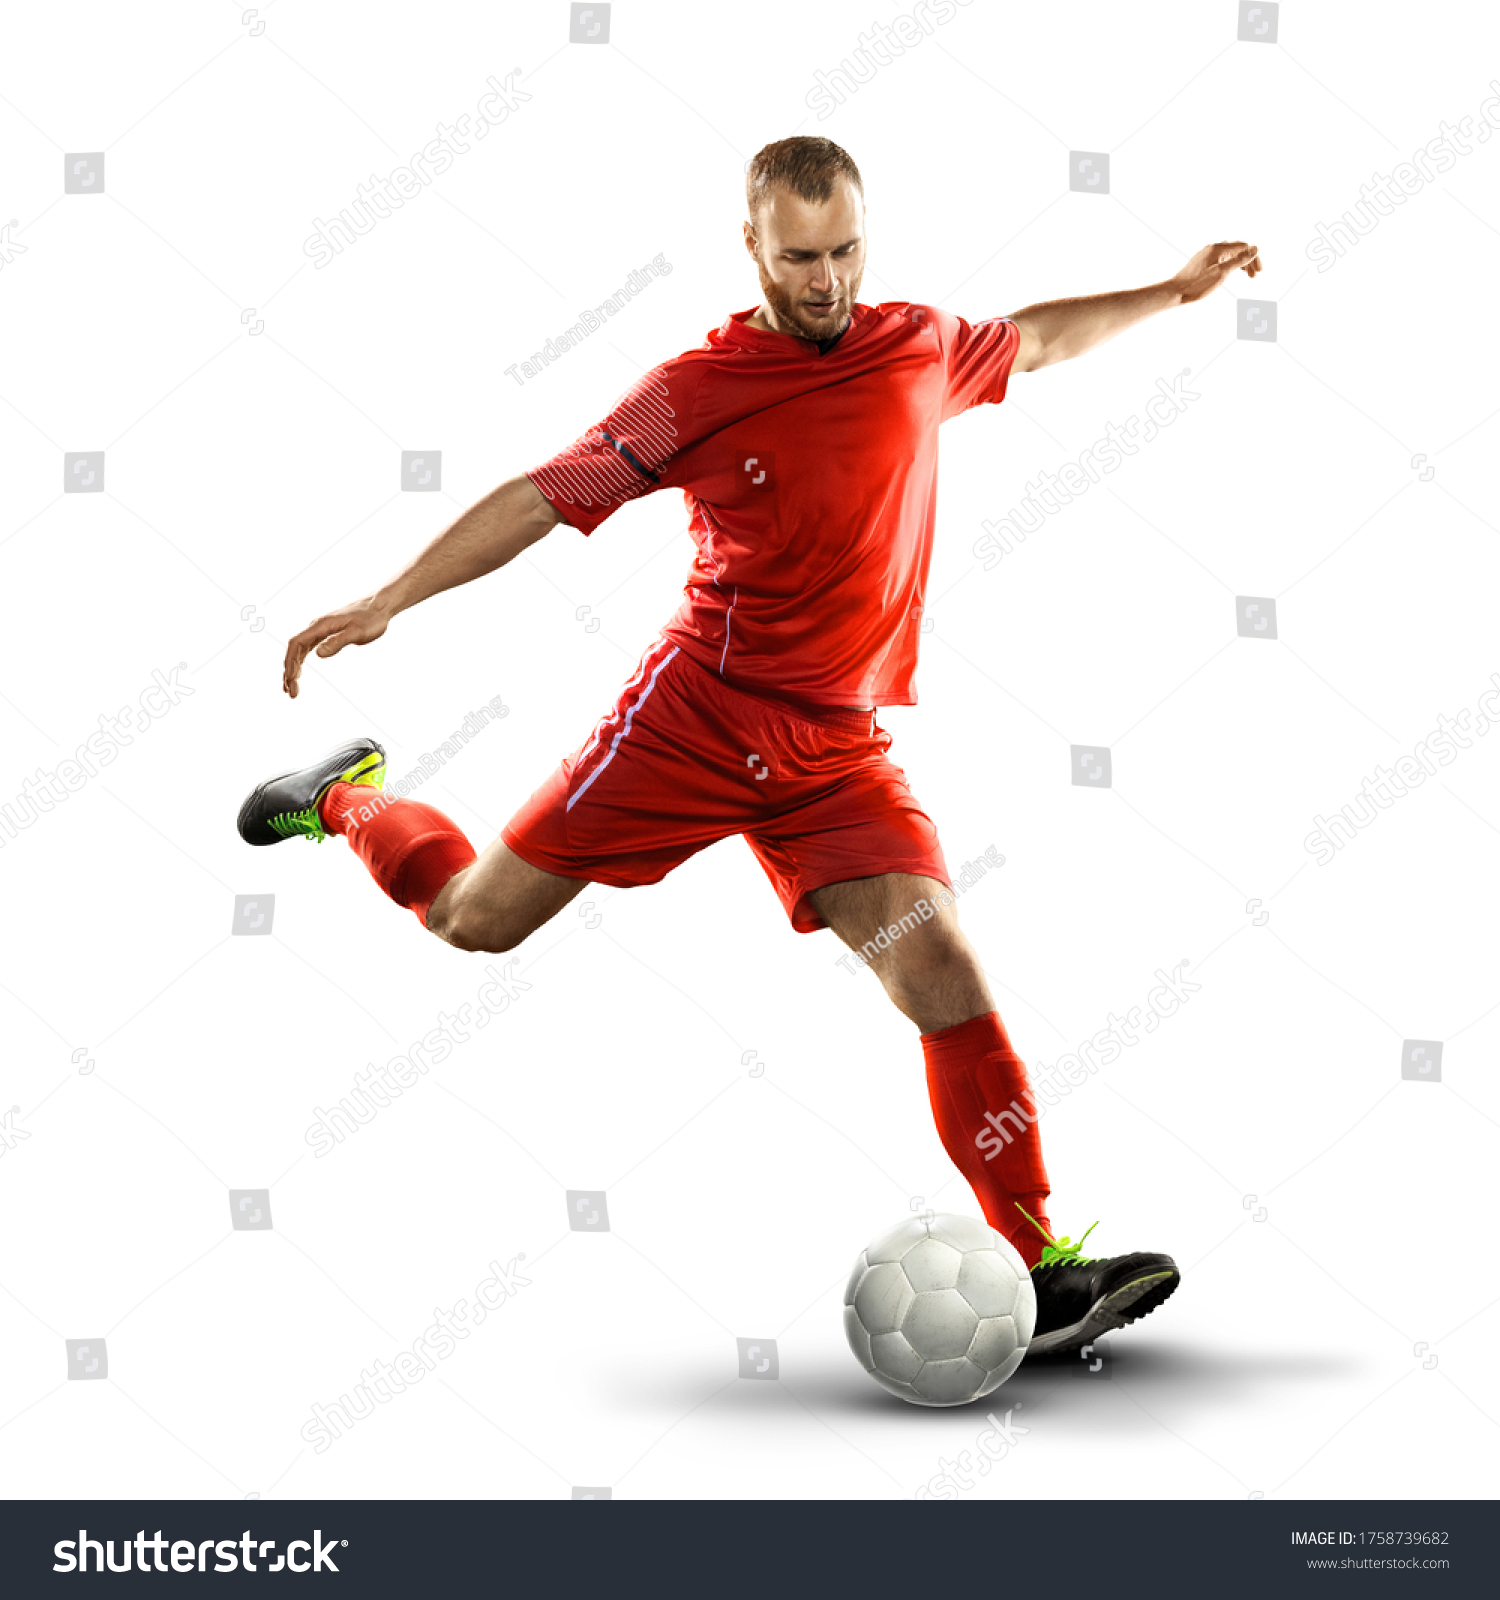 Soccer player in action with a ball on a white background #1758739682